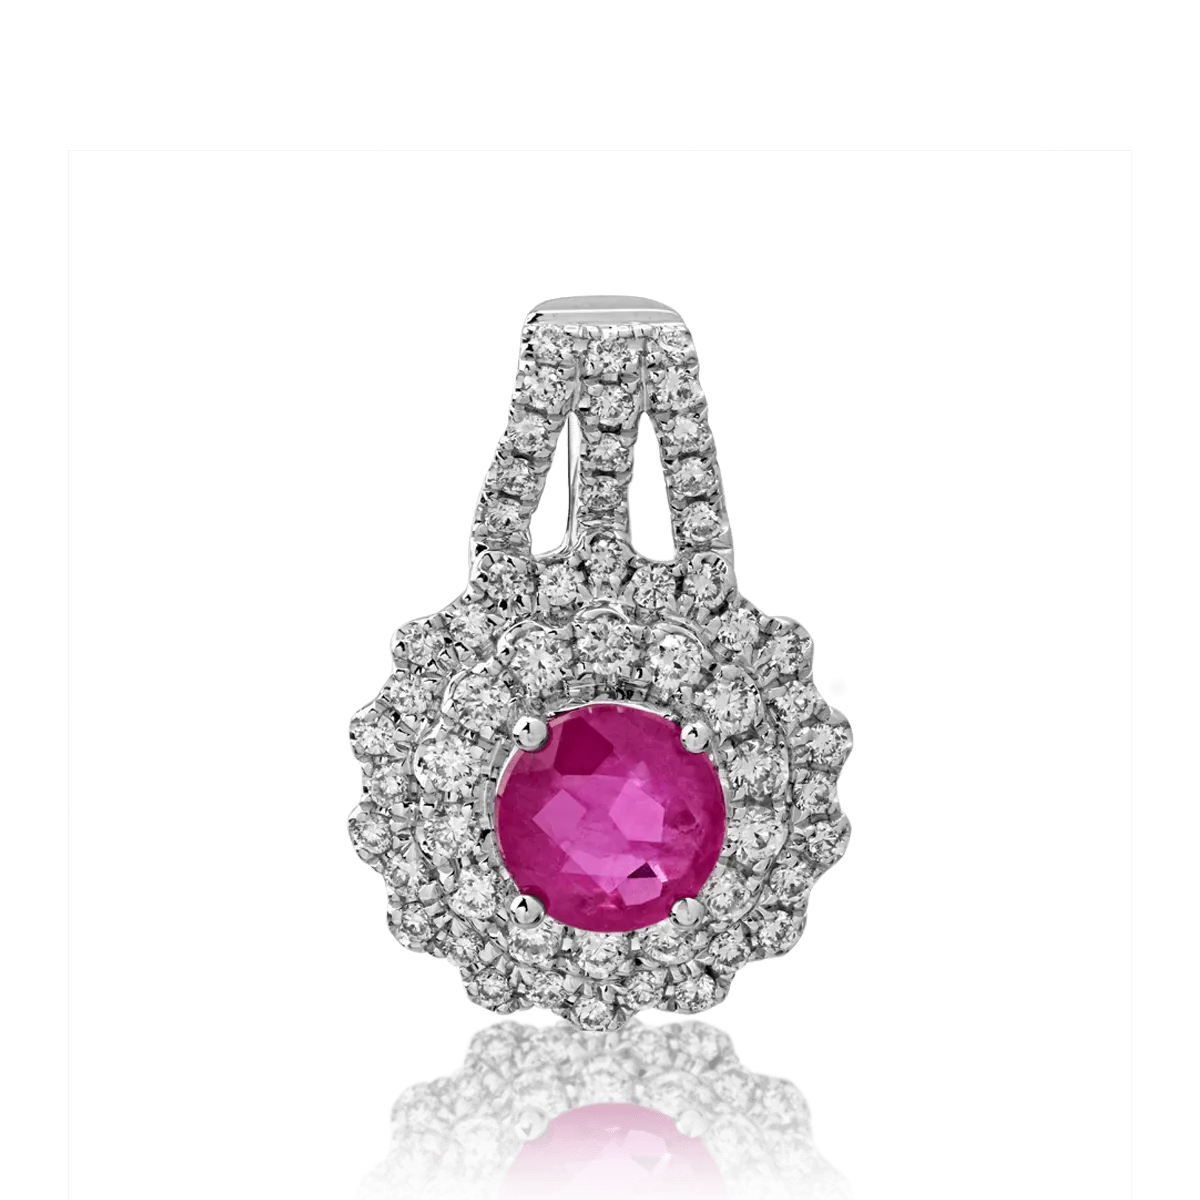 18K white gold pendant with 0.63ct ruby and 0.25ct diamonds